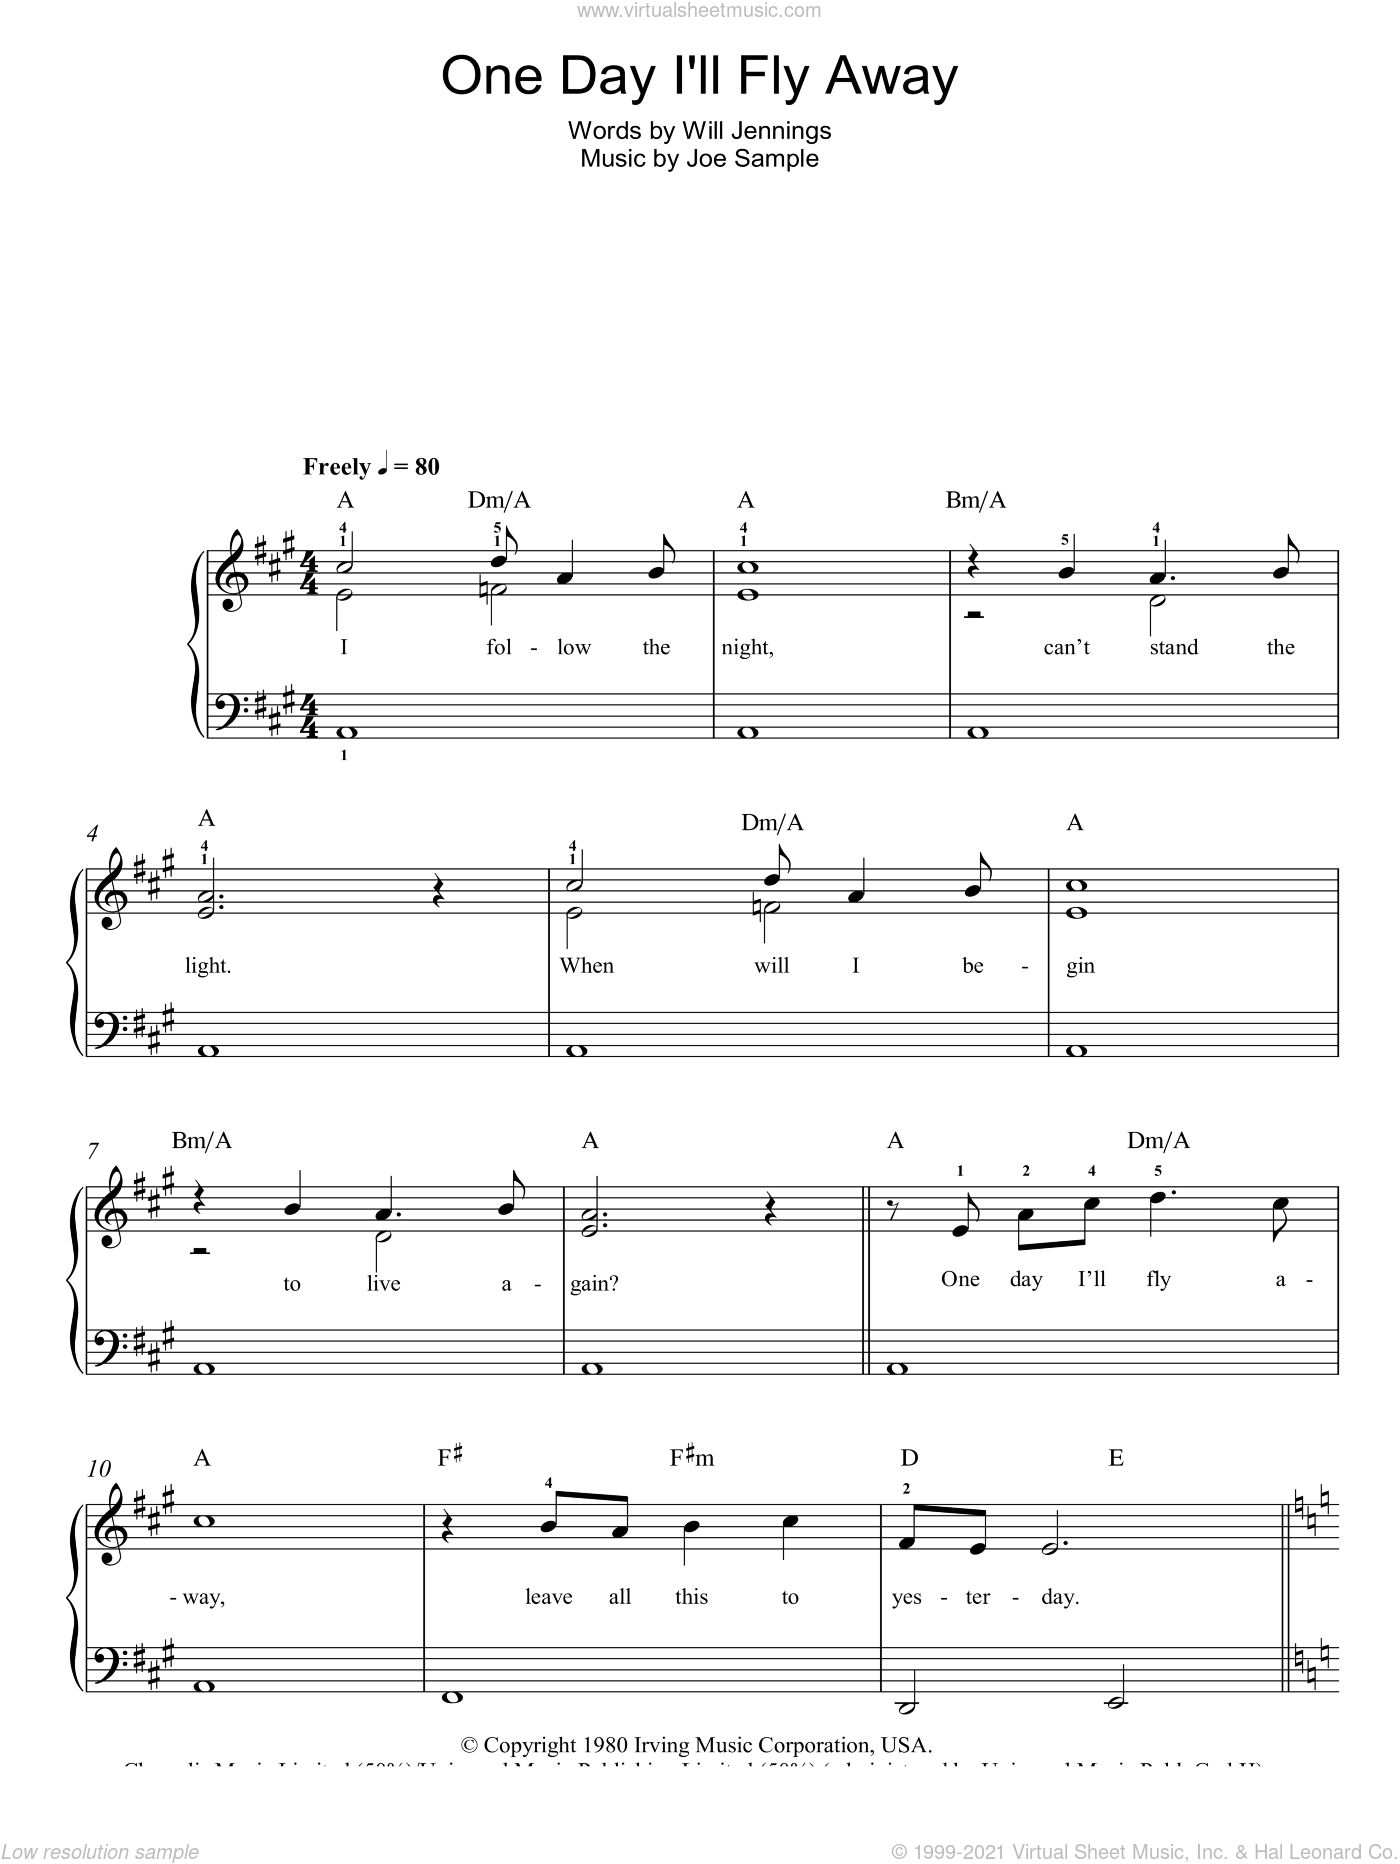 Kidman - One Day I'll Fly Away sheet music for piano solo [PDF]